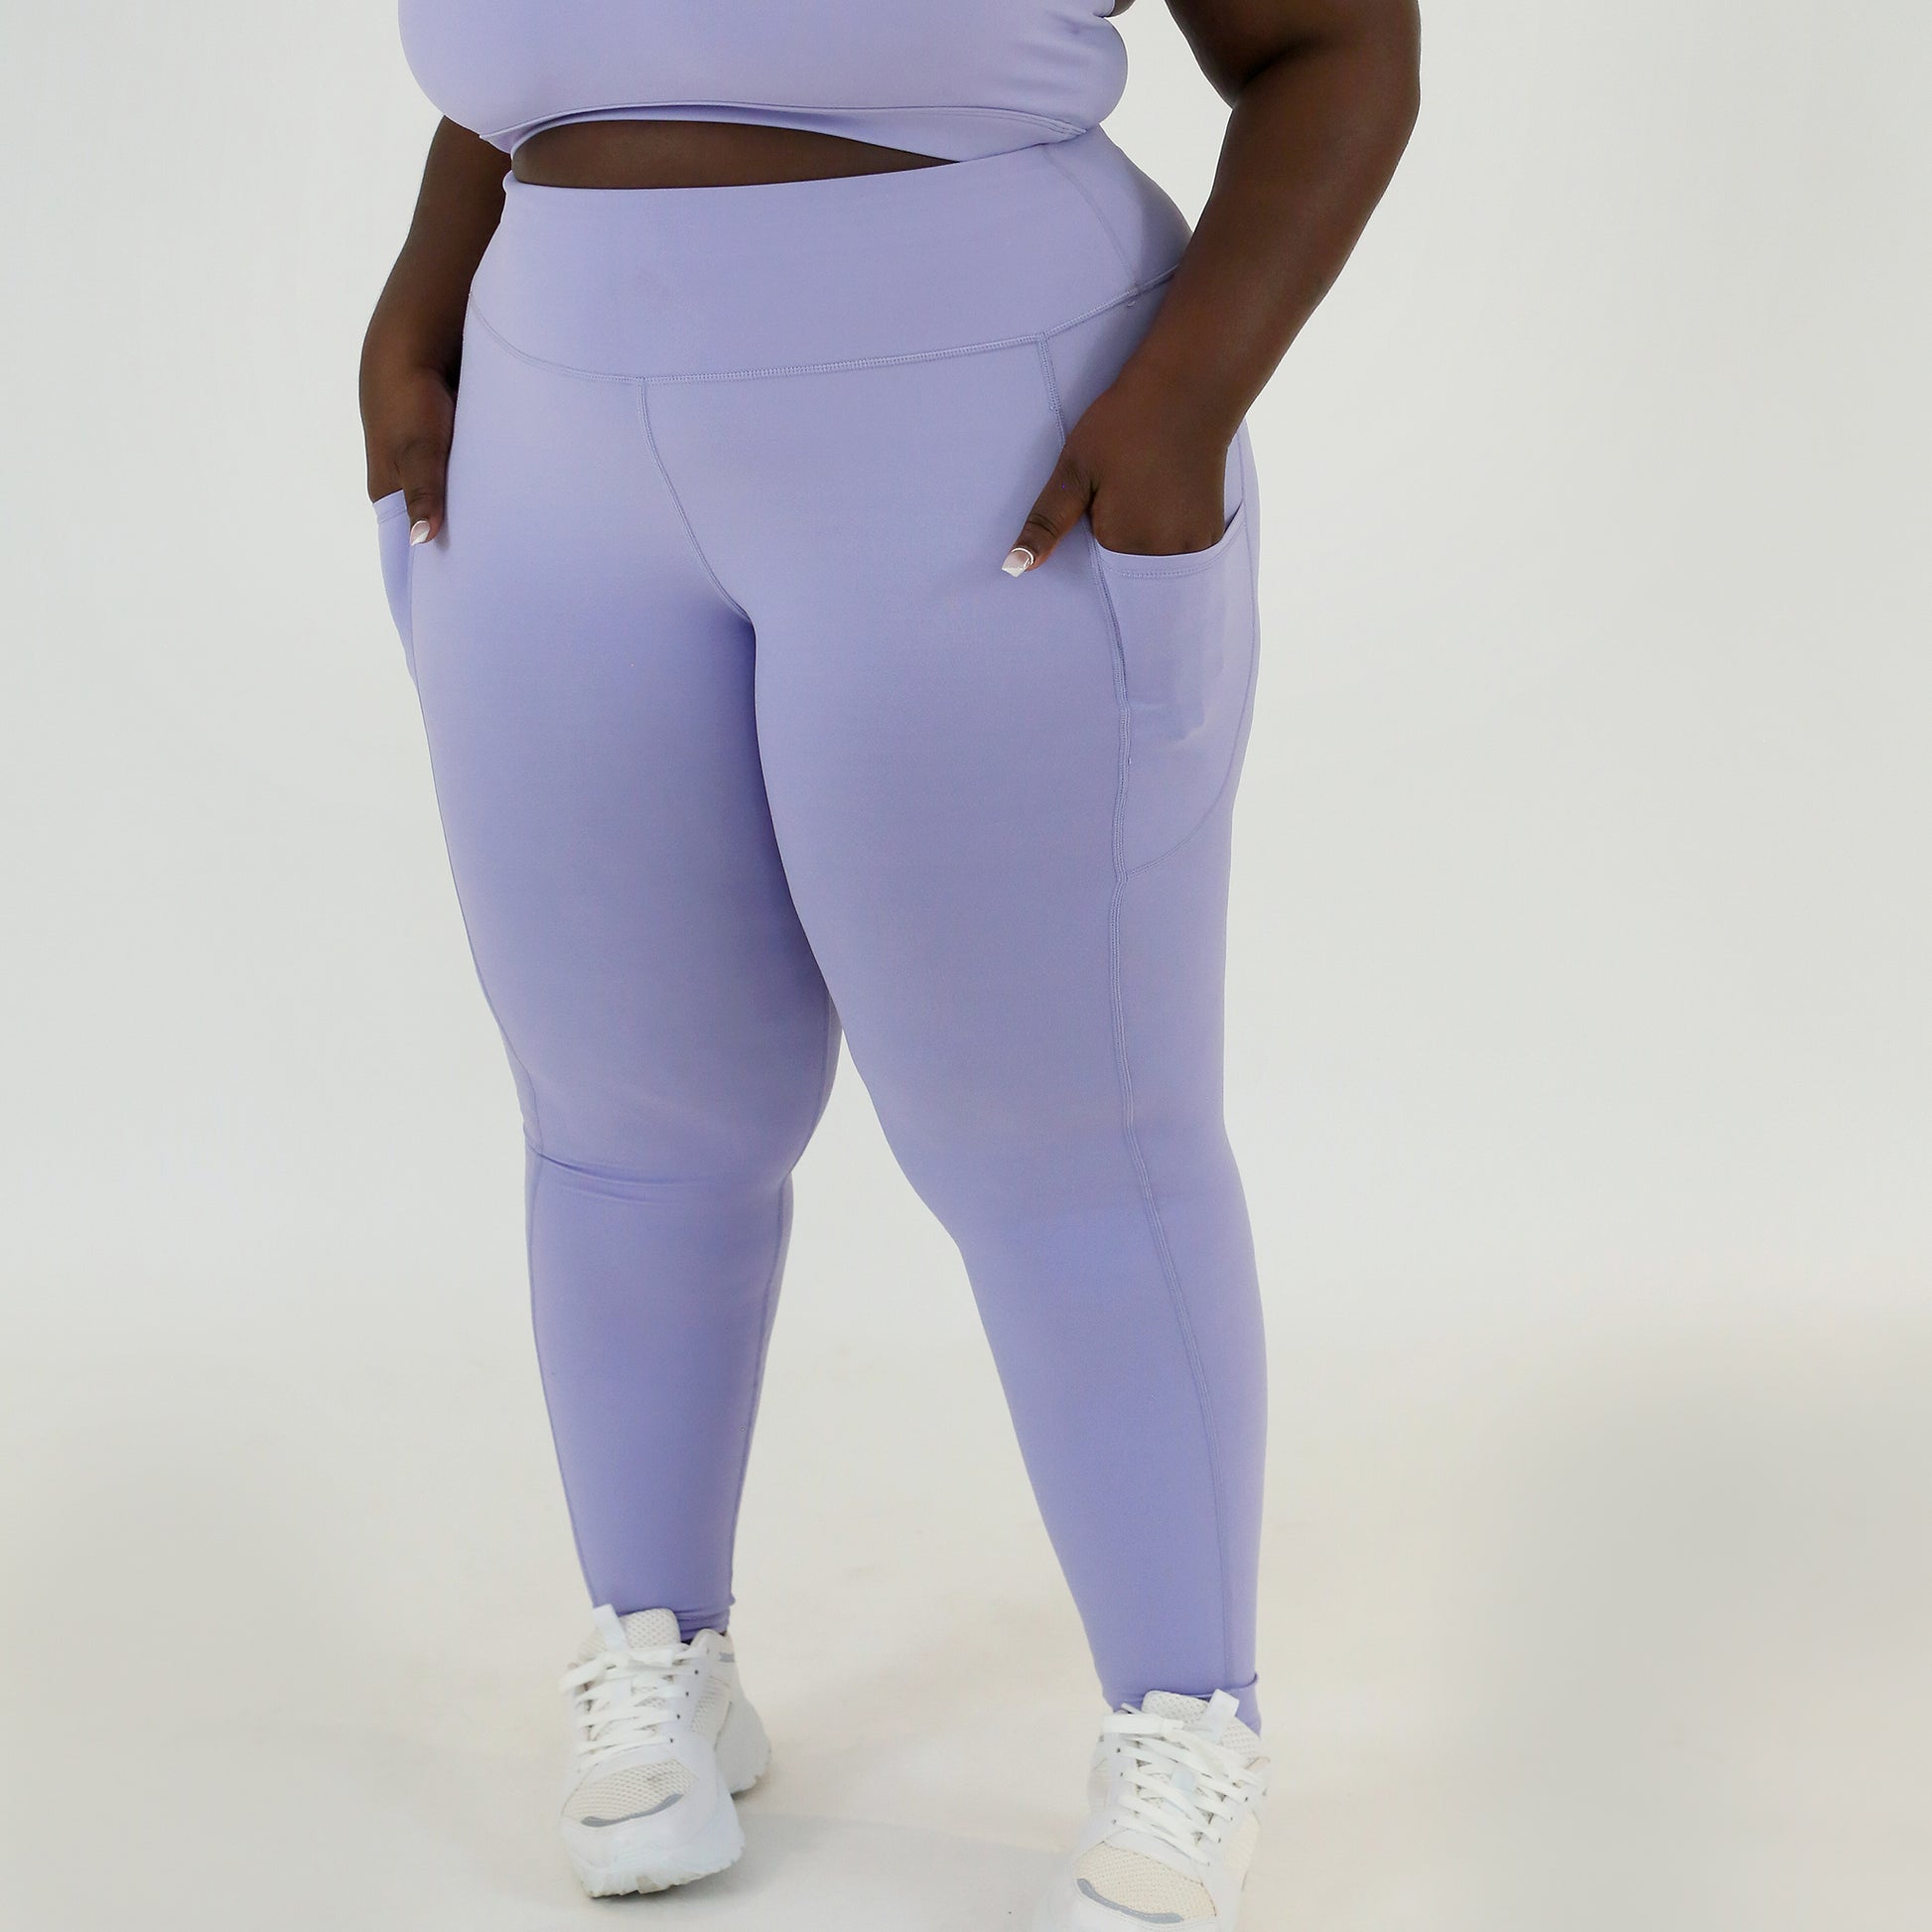 HIGH-RISE LEGGING WITH POCKETS - LILAC